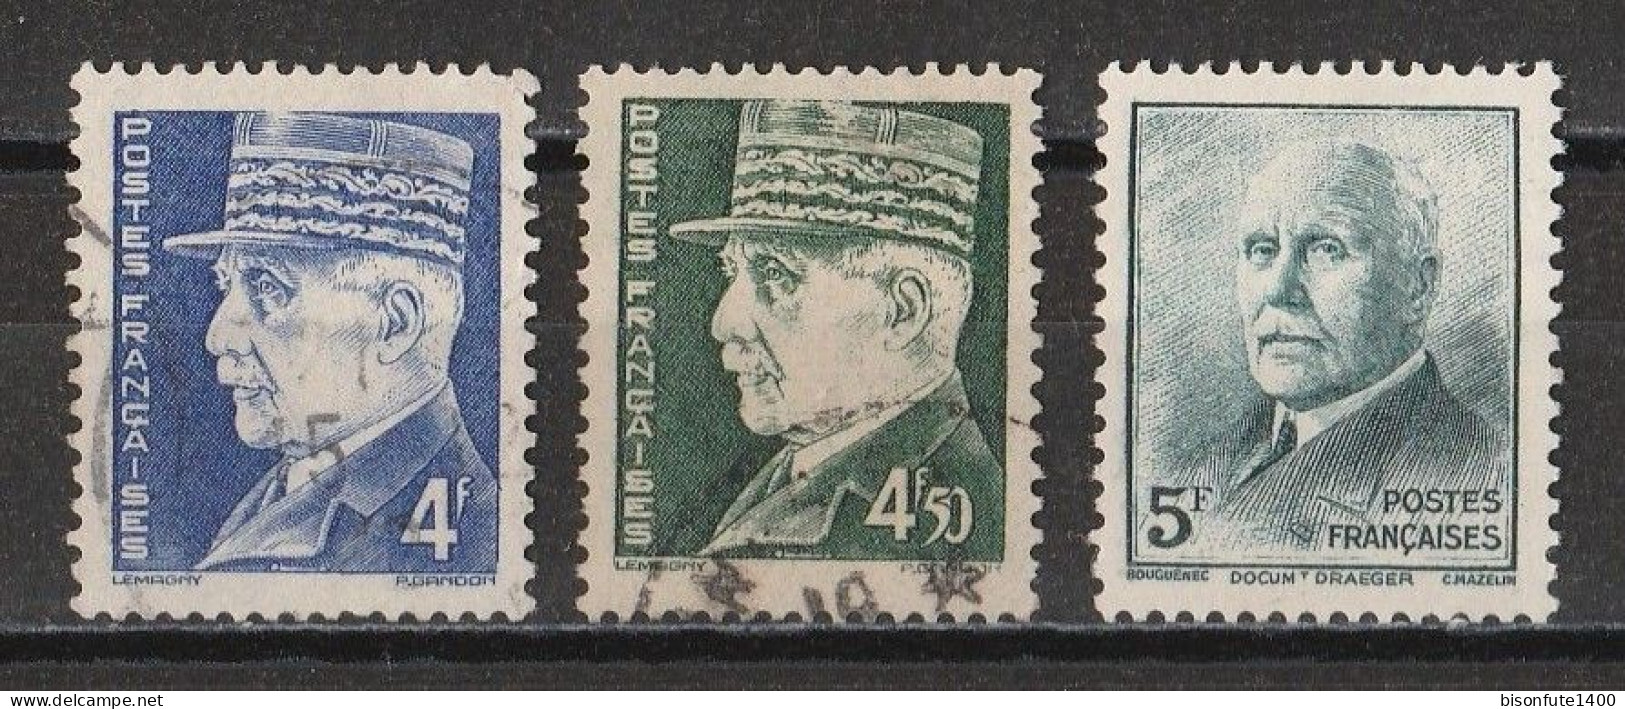 France 1941-42 : Timbres Yvert & Tellier N° 505 - 506 - 507 - 508 - 509 - 510 - 510a - 511 - 512 - 514 - 515 - 516 -... - Used Stamps